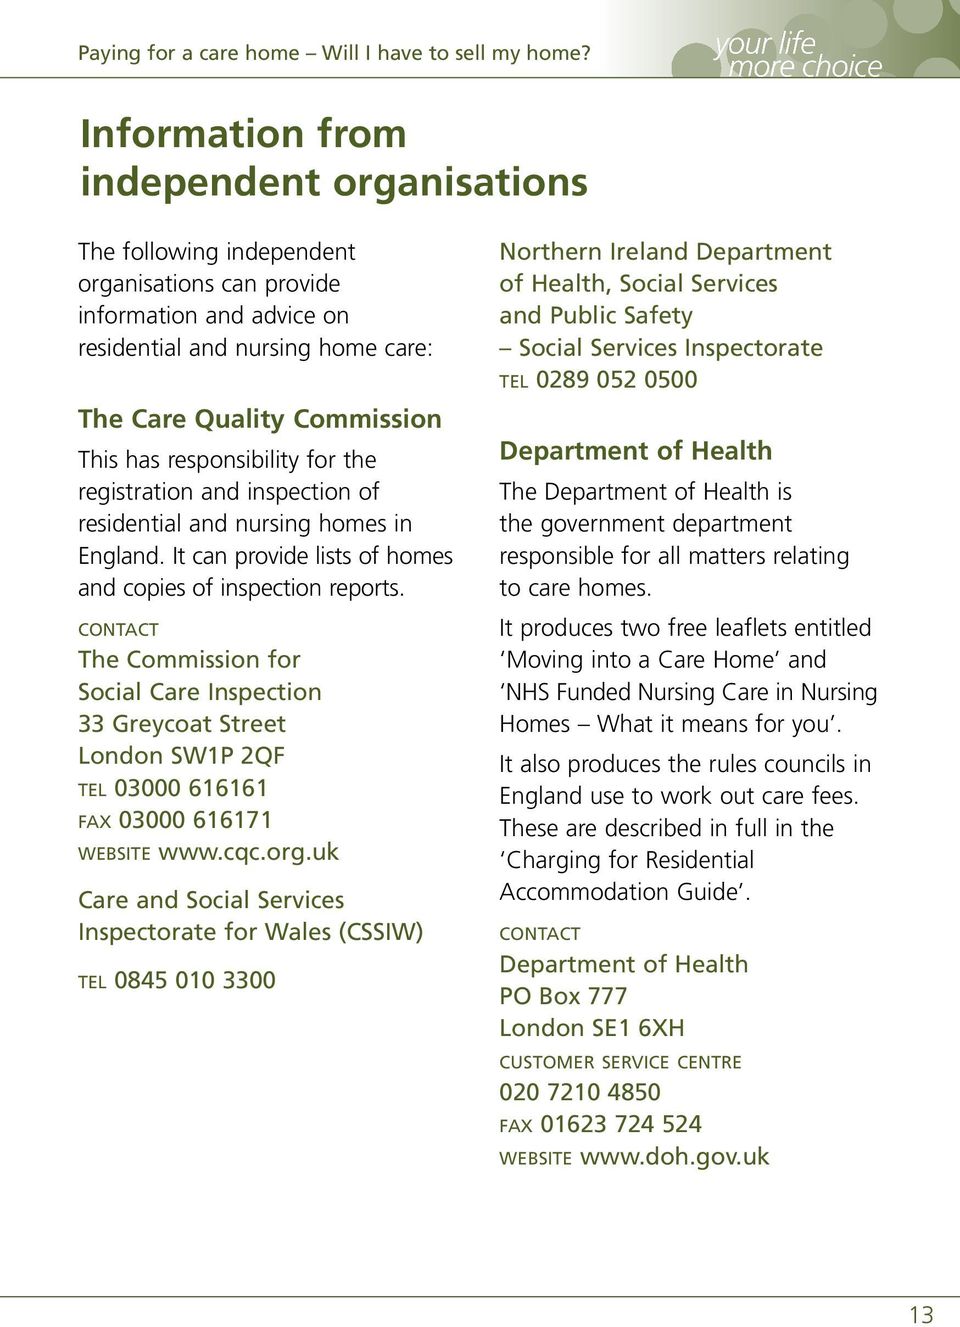 The Commission for Social Care Inspection 33 Greycoat Street London SW1P 2QF TEL 03000 616161 FAX 03000 616171 WEBSITE www.cqc.org.